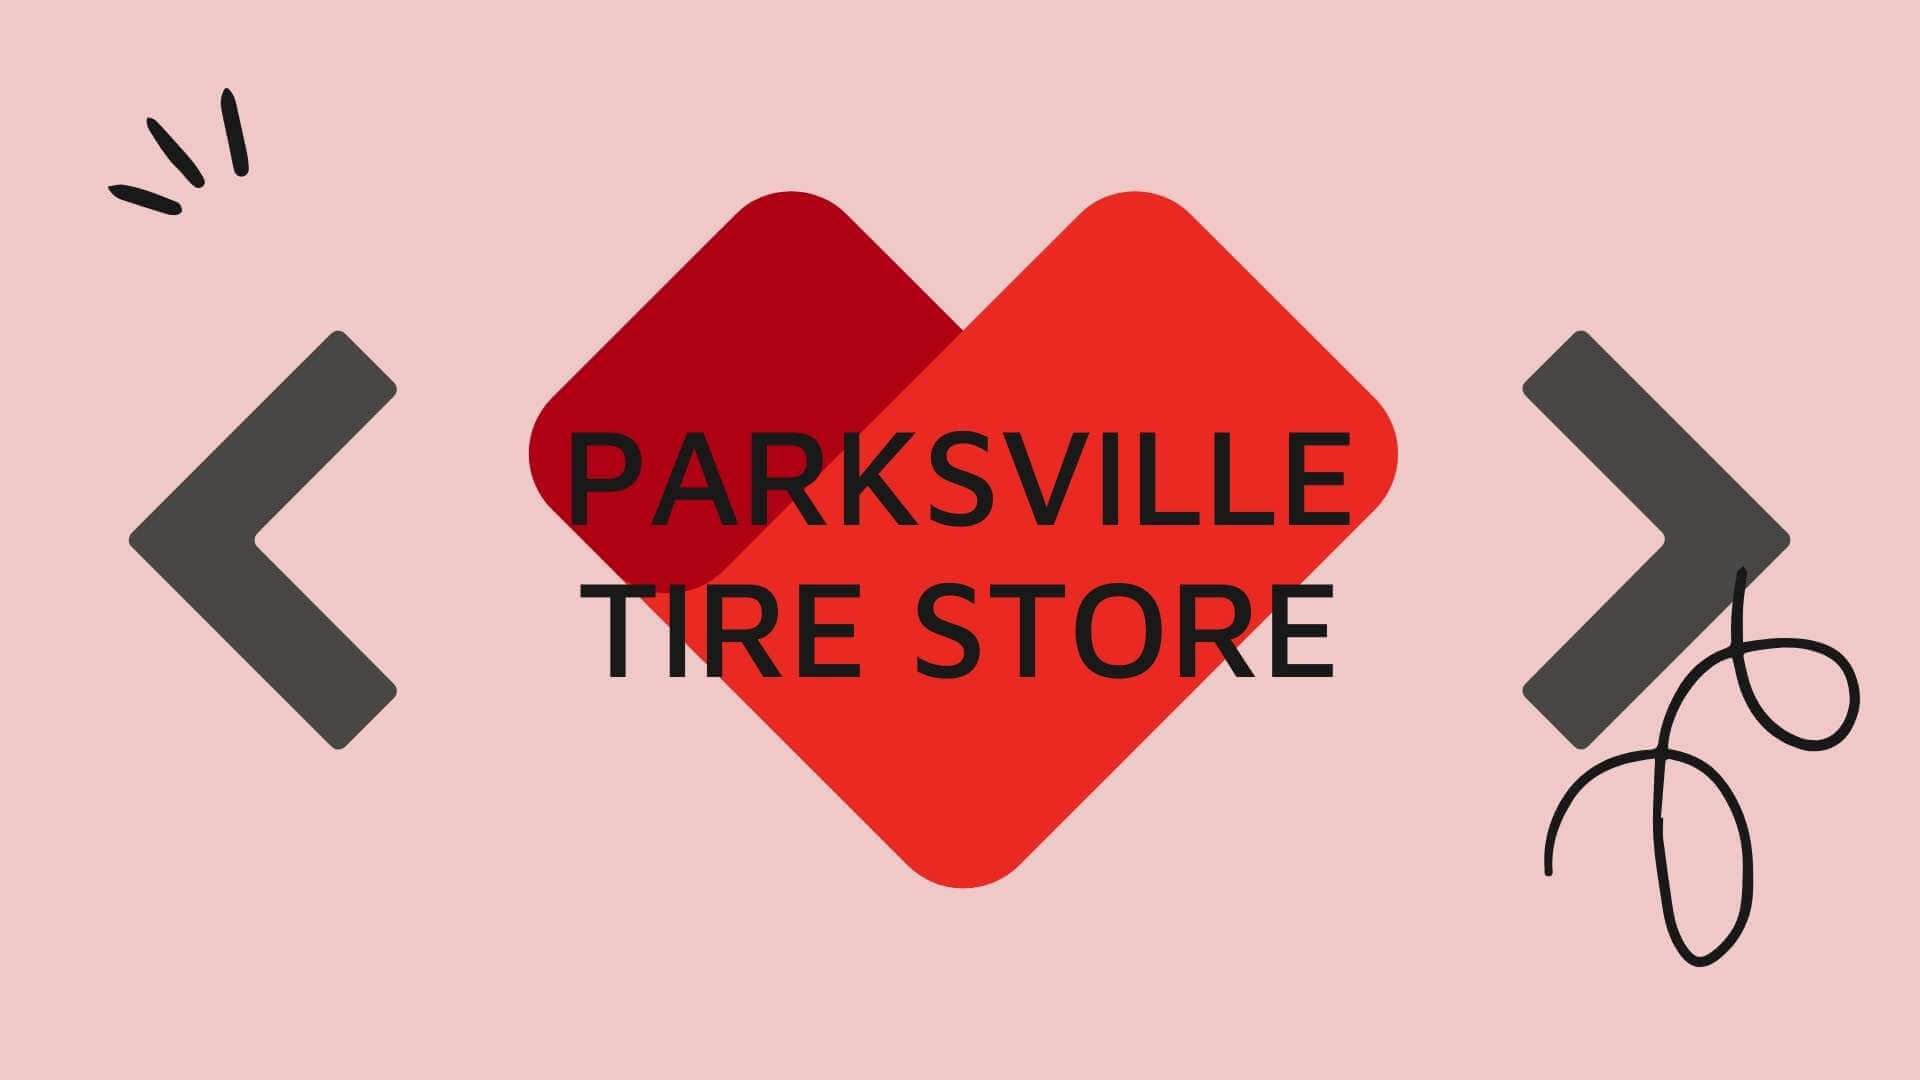 Website Redesign for Parksville Tire Store